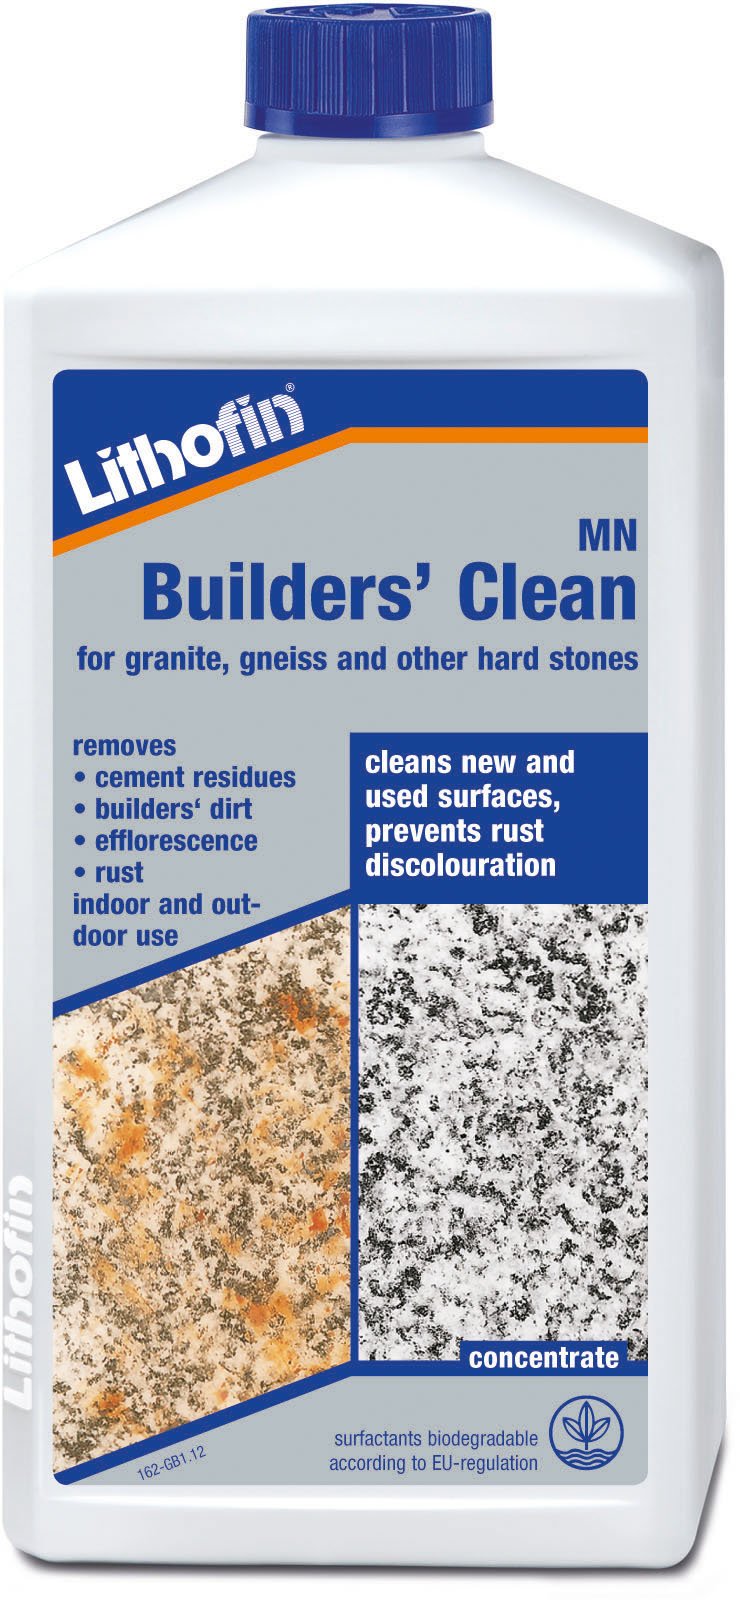 Lithofin Builders' Clean for granite, gneiss and other hard stones 